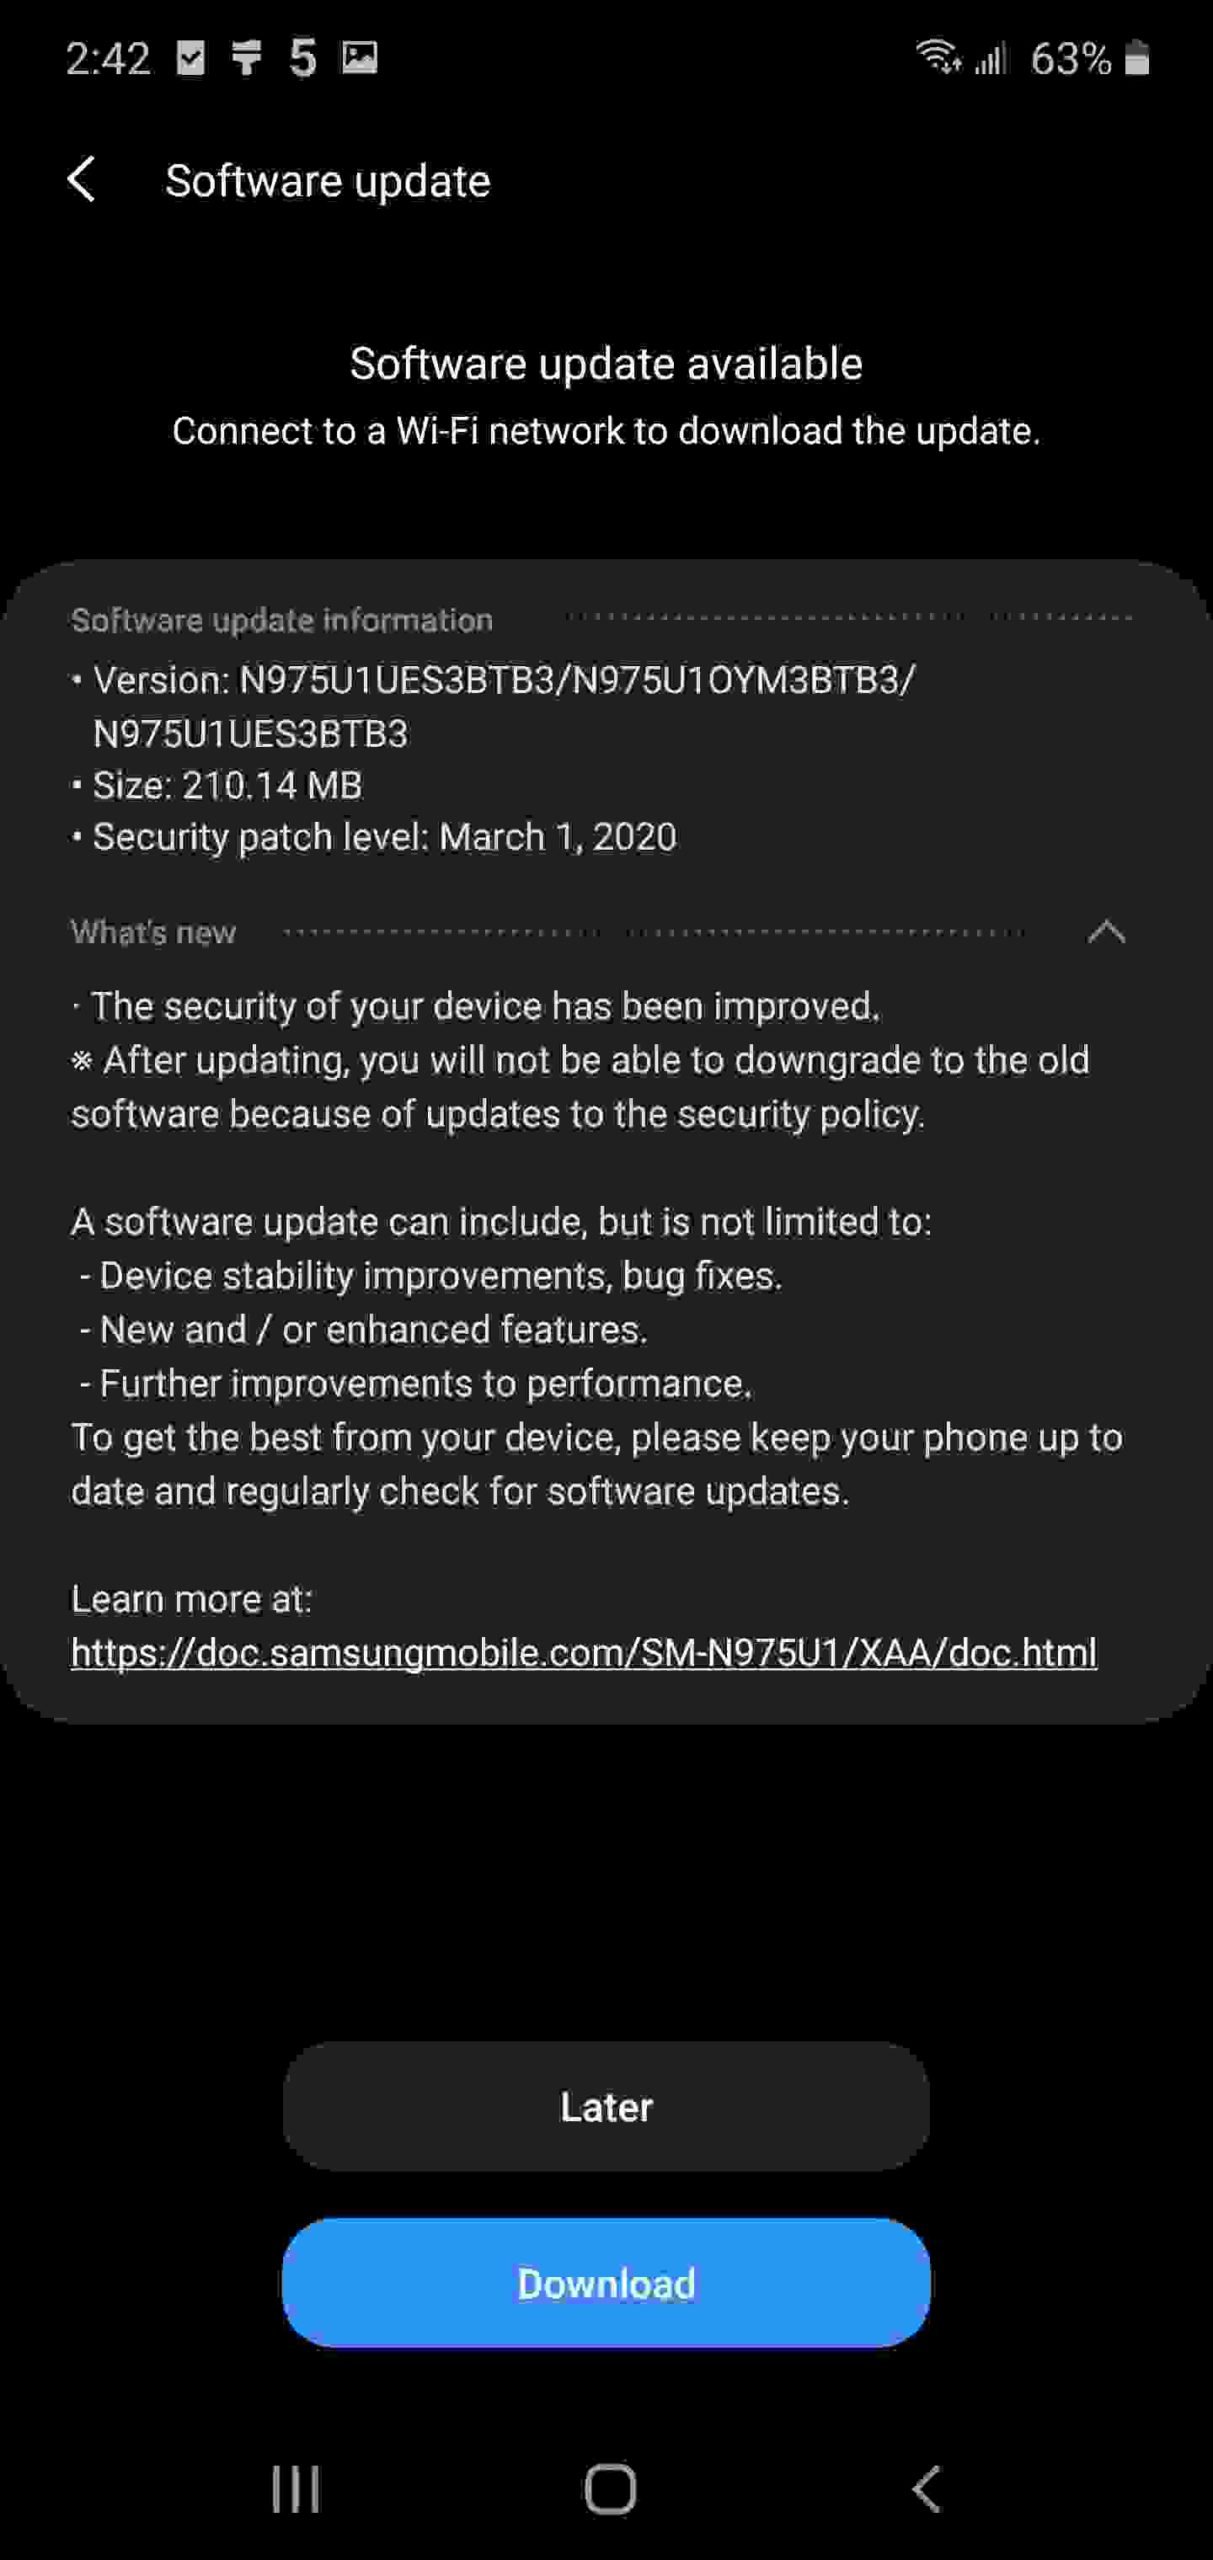 Samsung Galaxy Note 10, Note 10+ March Security Patch Update